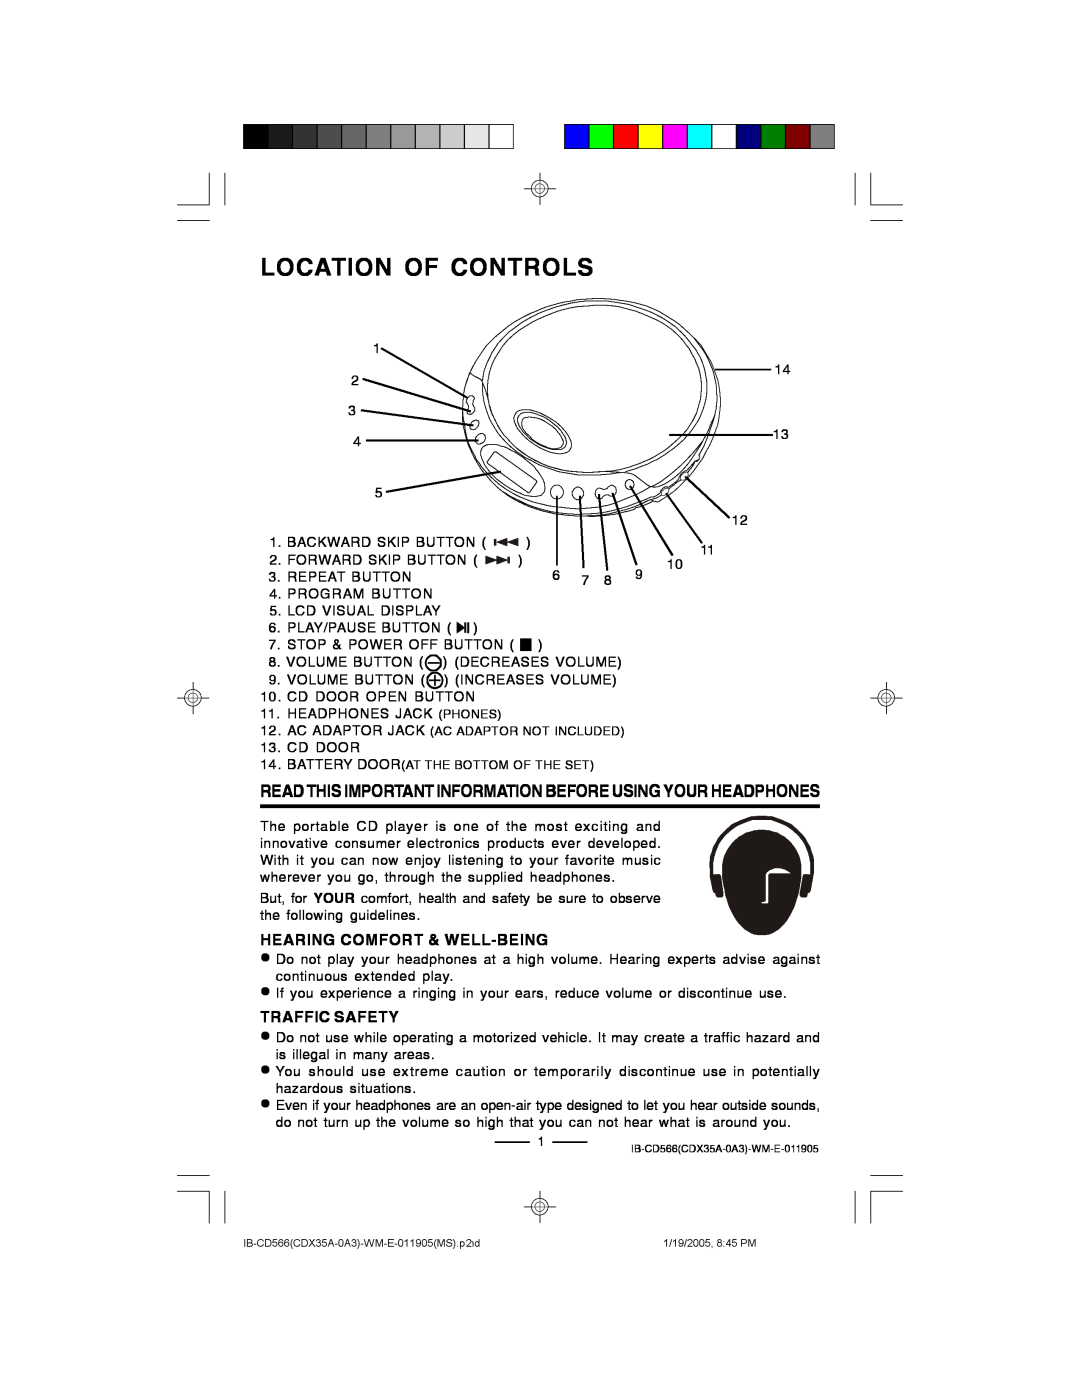 Lenoxx Electronics CD-566 manual Location Of Controls, Hearing Comfort & Well-Being, Traffic Safety 